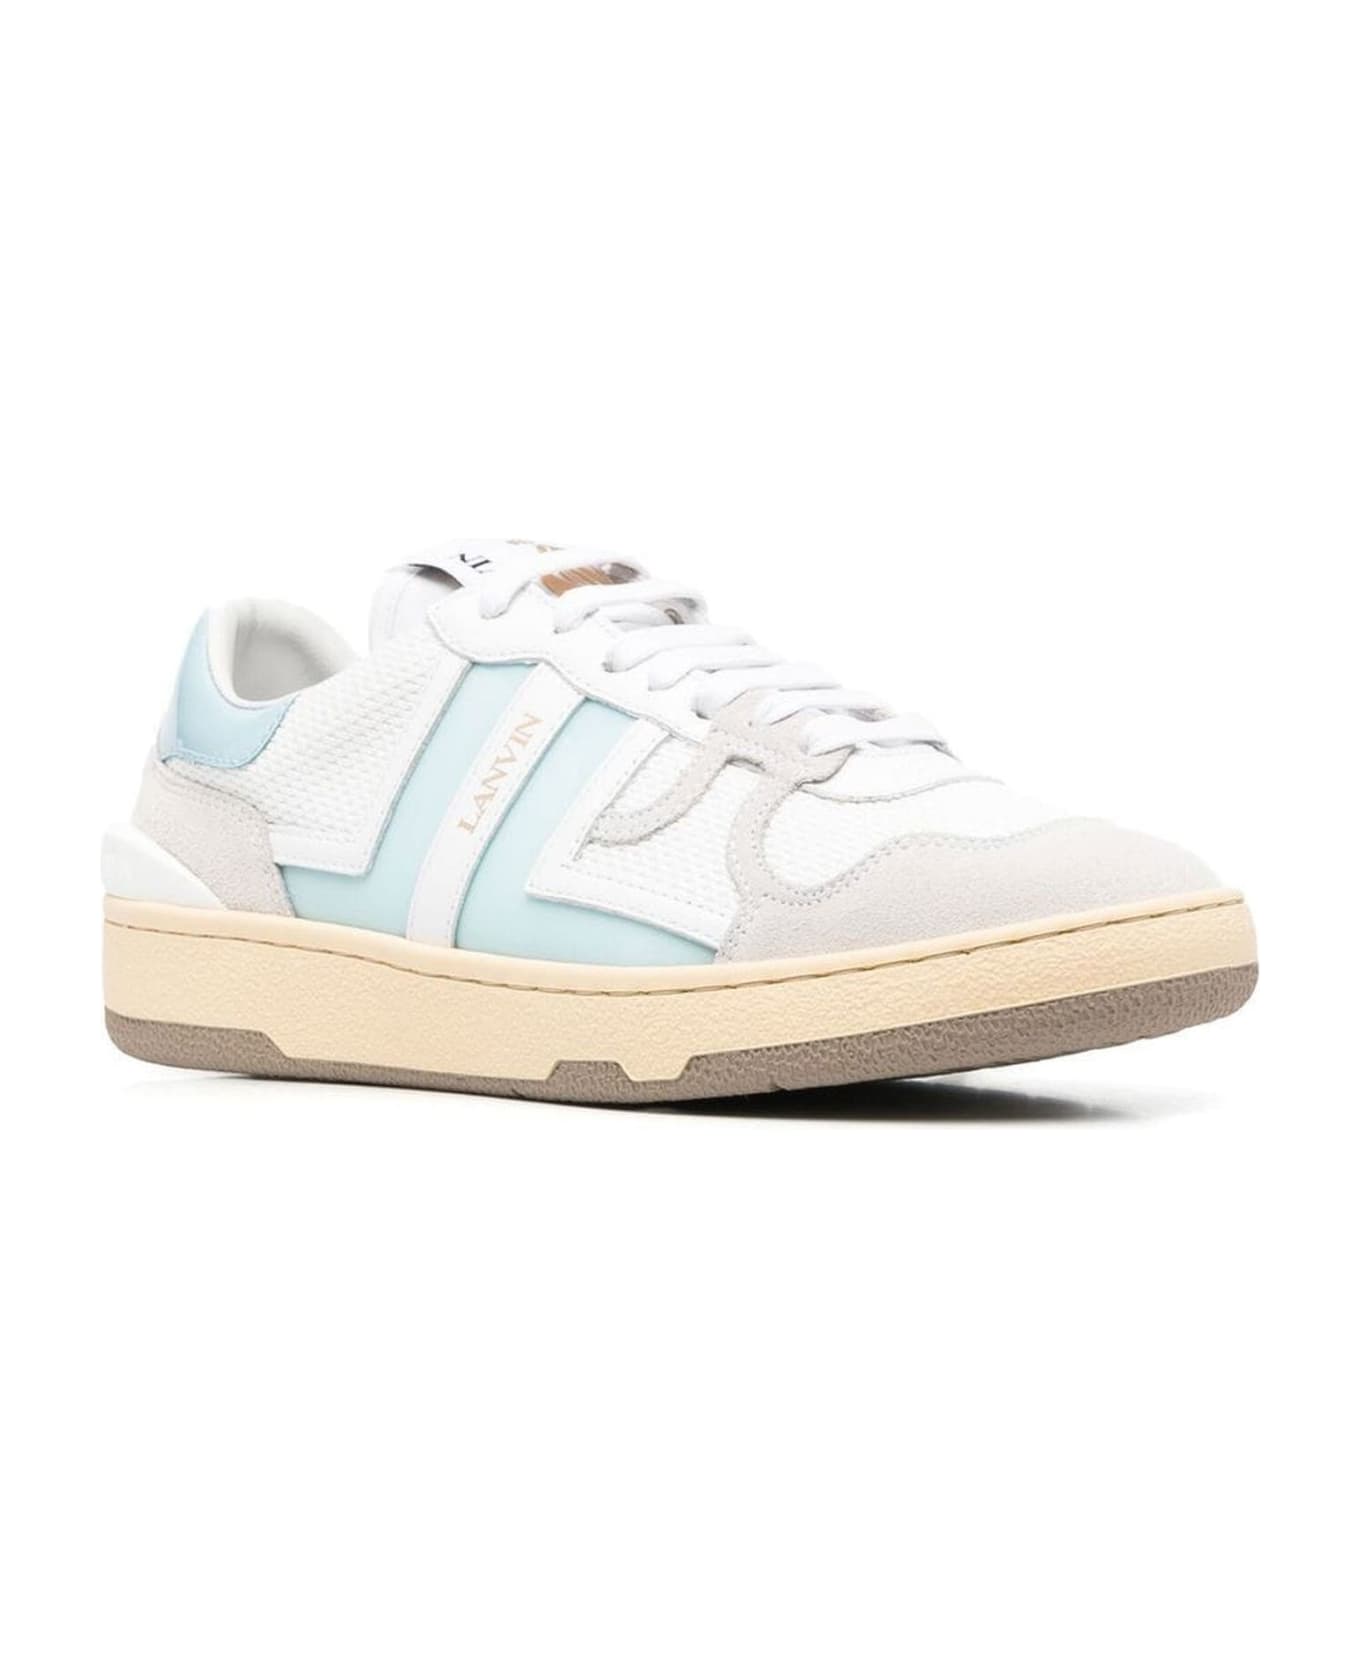 Lanvin White Calf Leather Clay Sneakers - Bianco